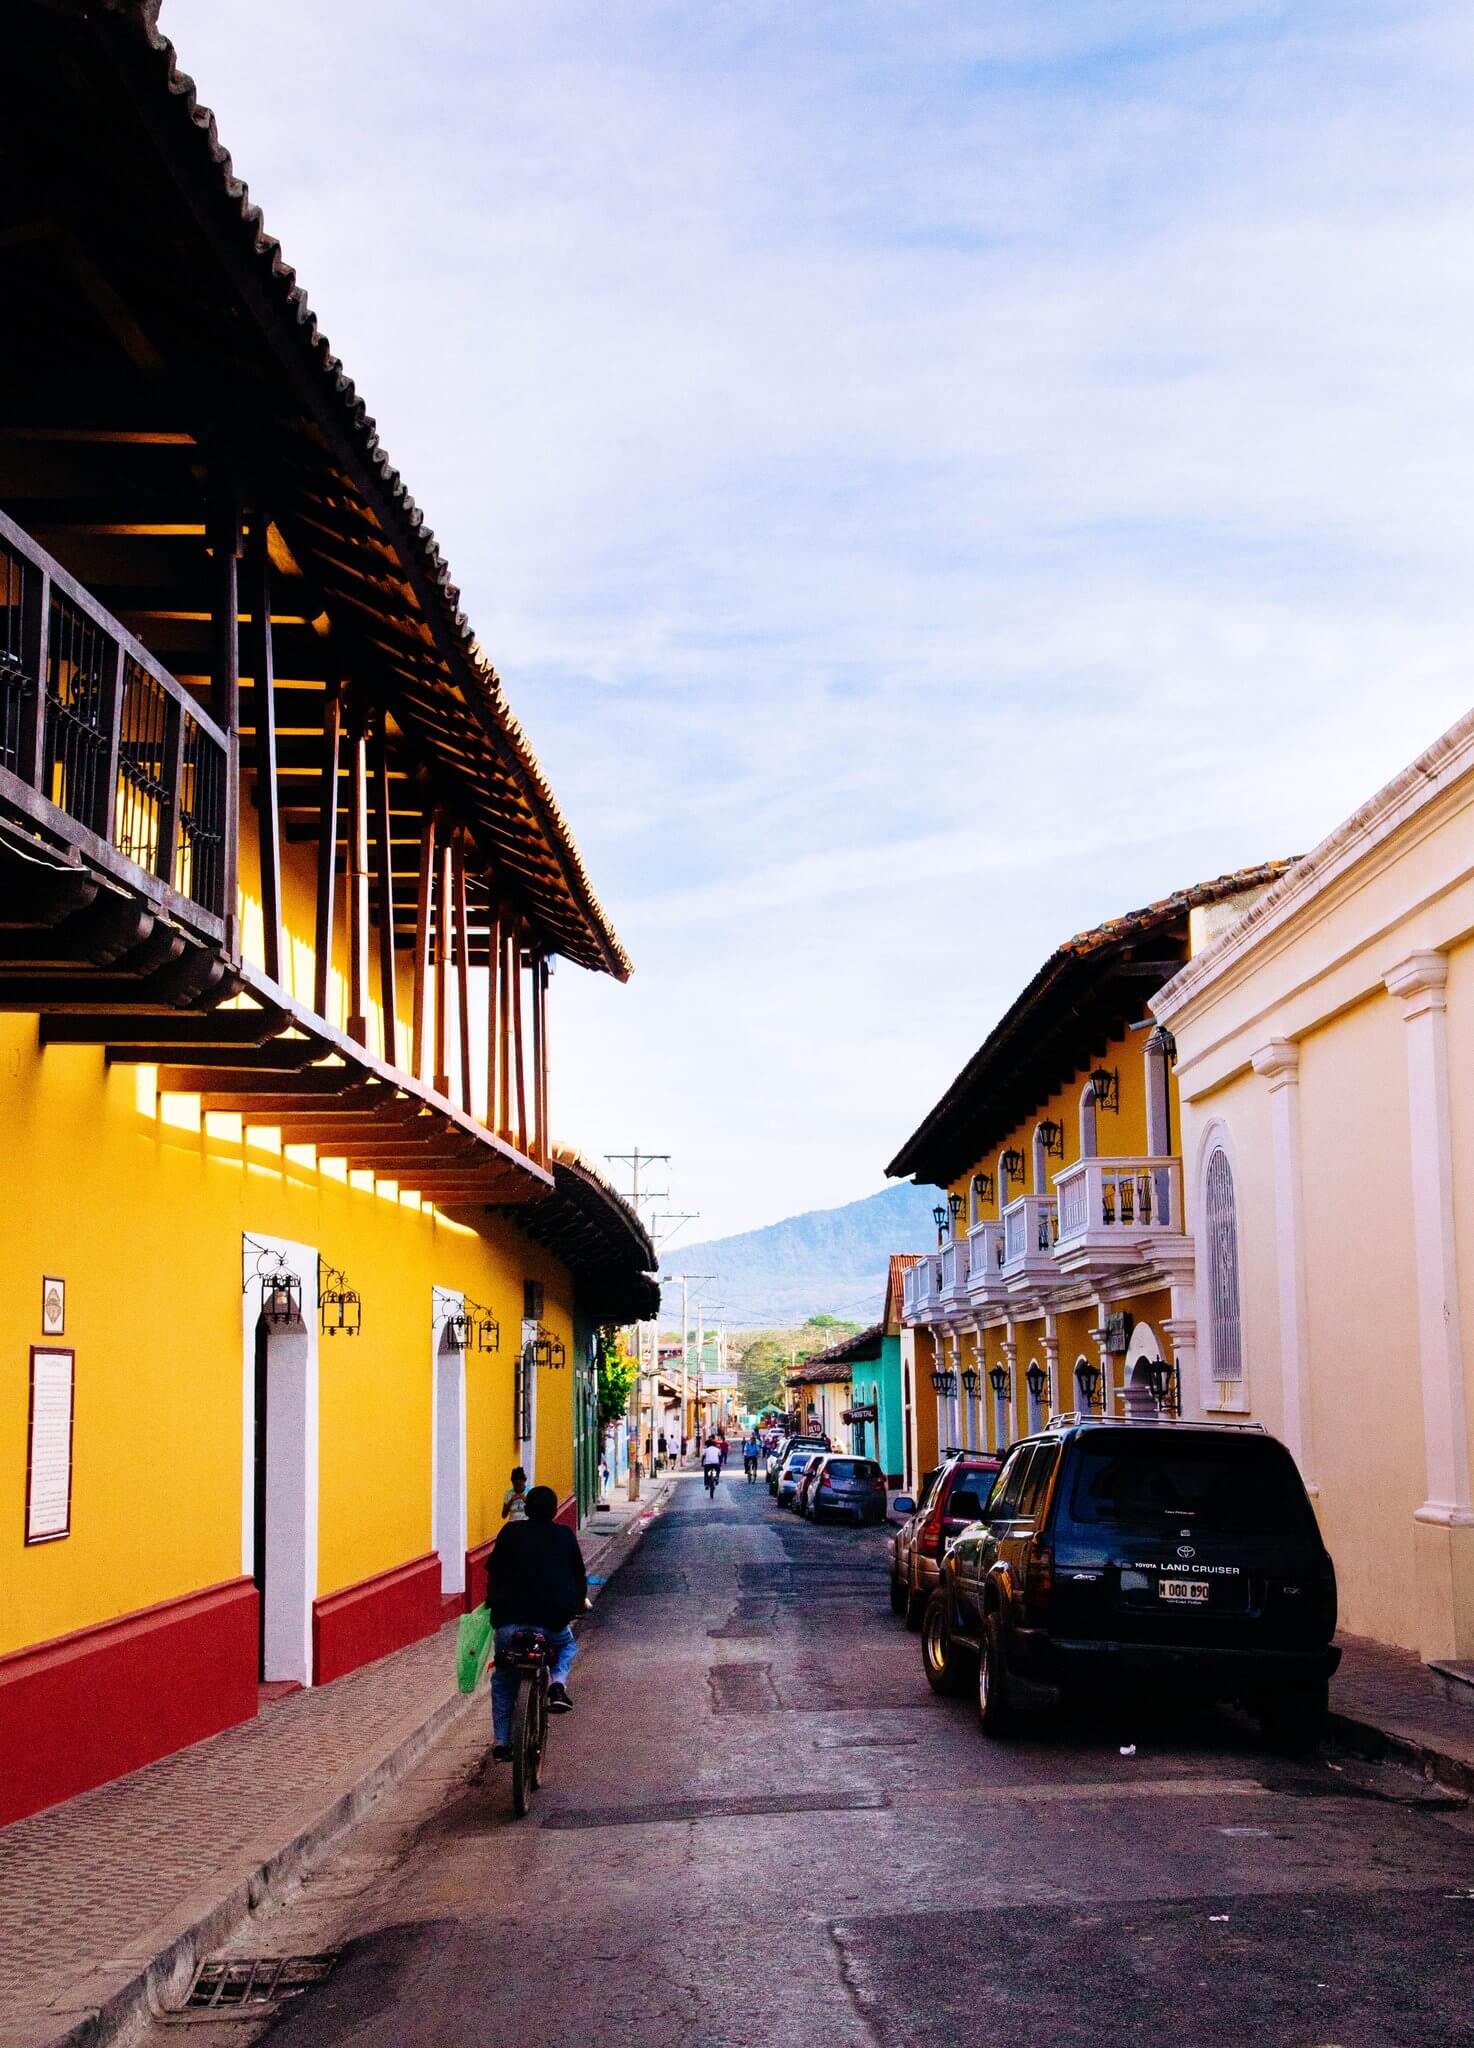 The streets lined with vibrant colored buildings makes Granada one of the most photogenic places to visit in Nicaragua